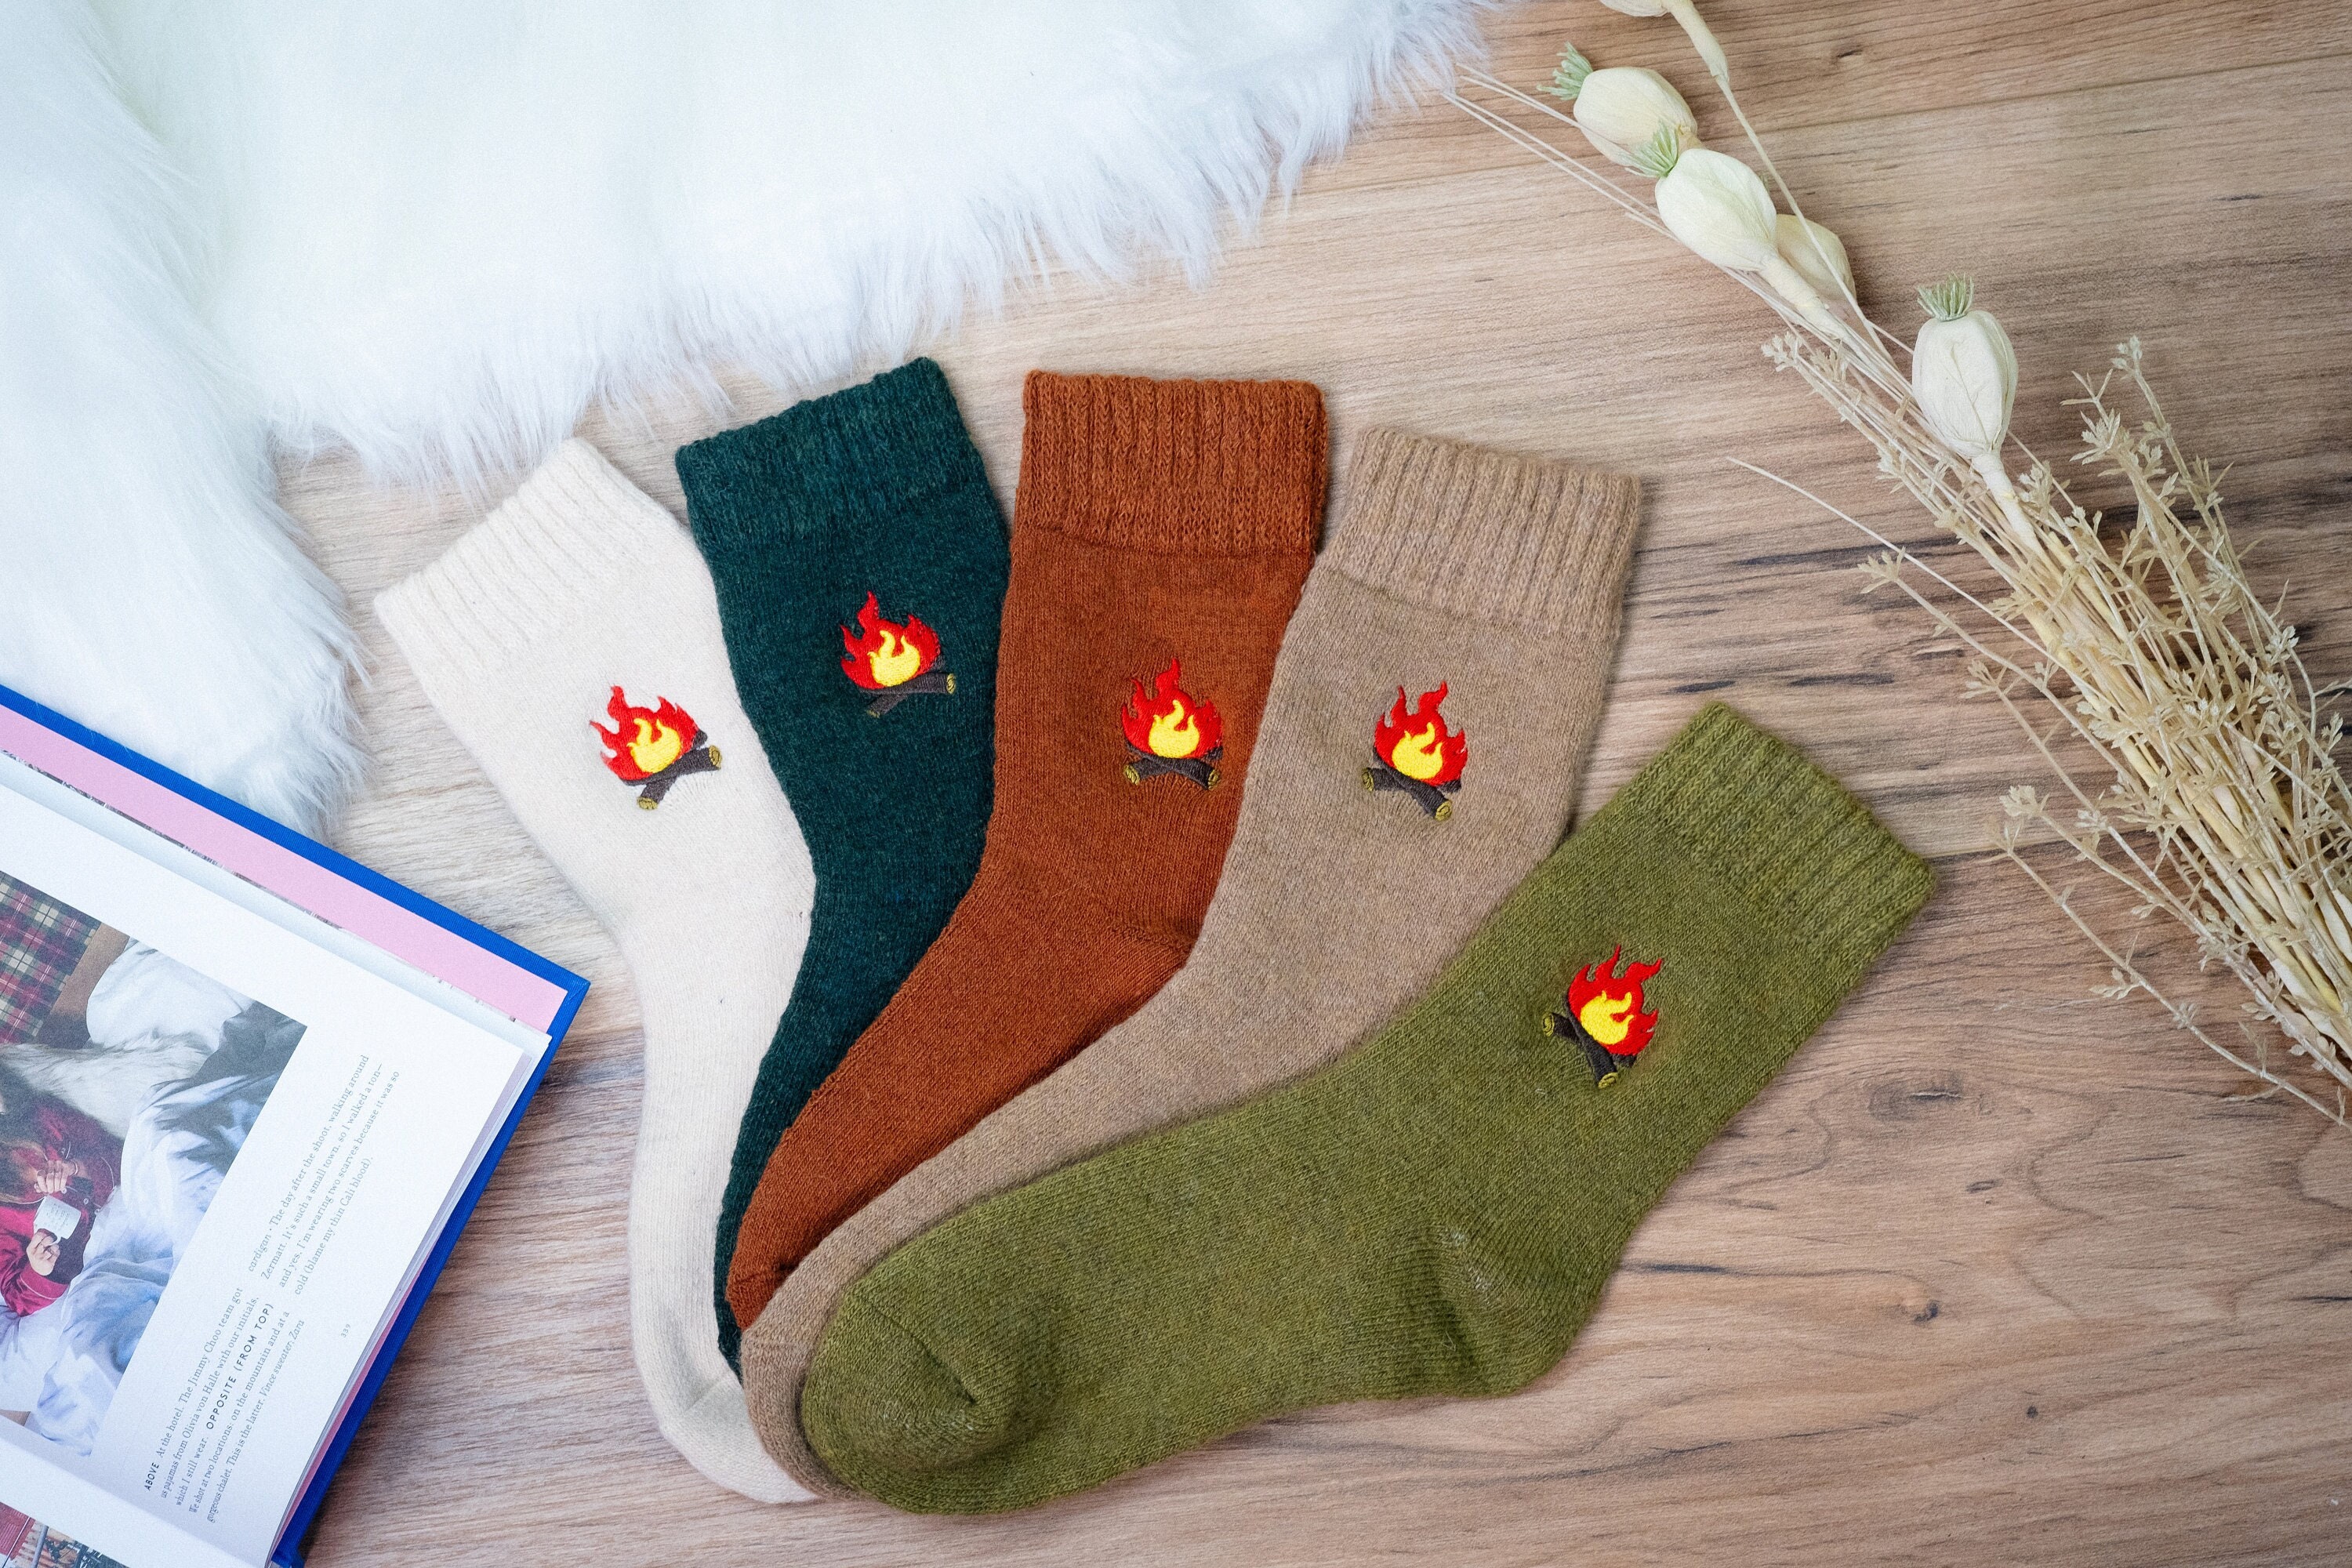 Embroidered Camp Fire Wool Socks - Winter Warm Fluffy Woollen Premium Quality One Size Unisex Happy, Cute, Cosy Gift Idea